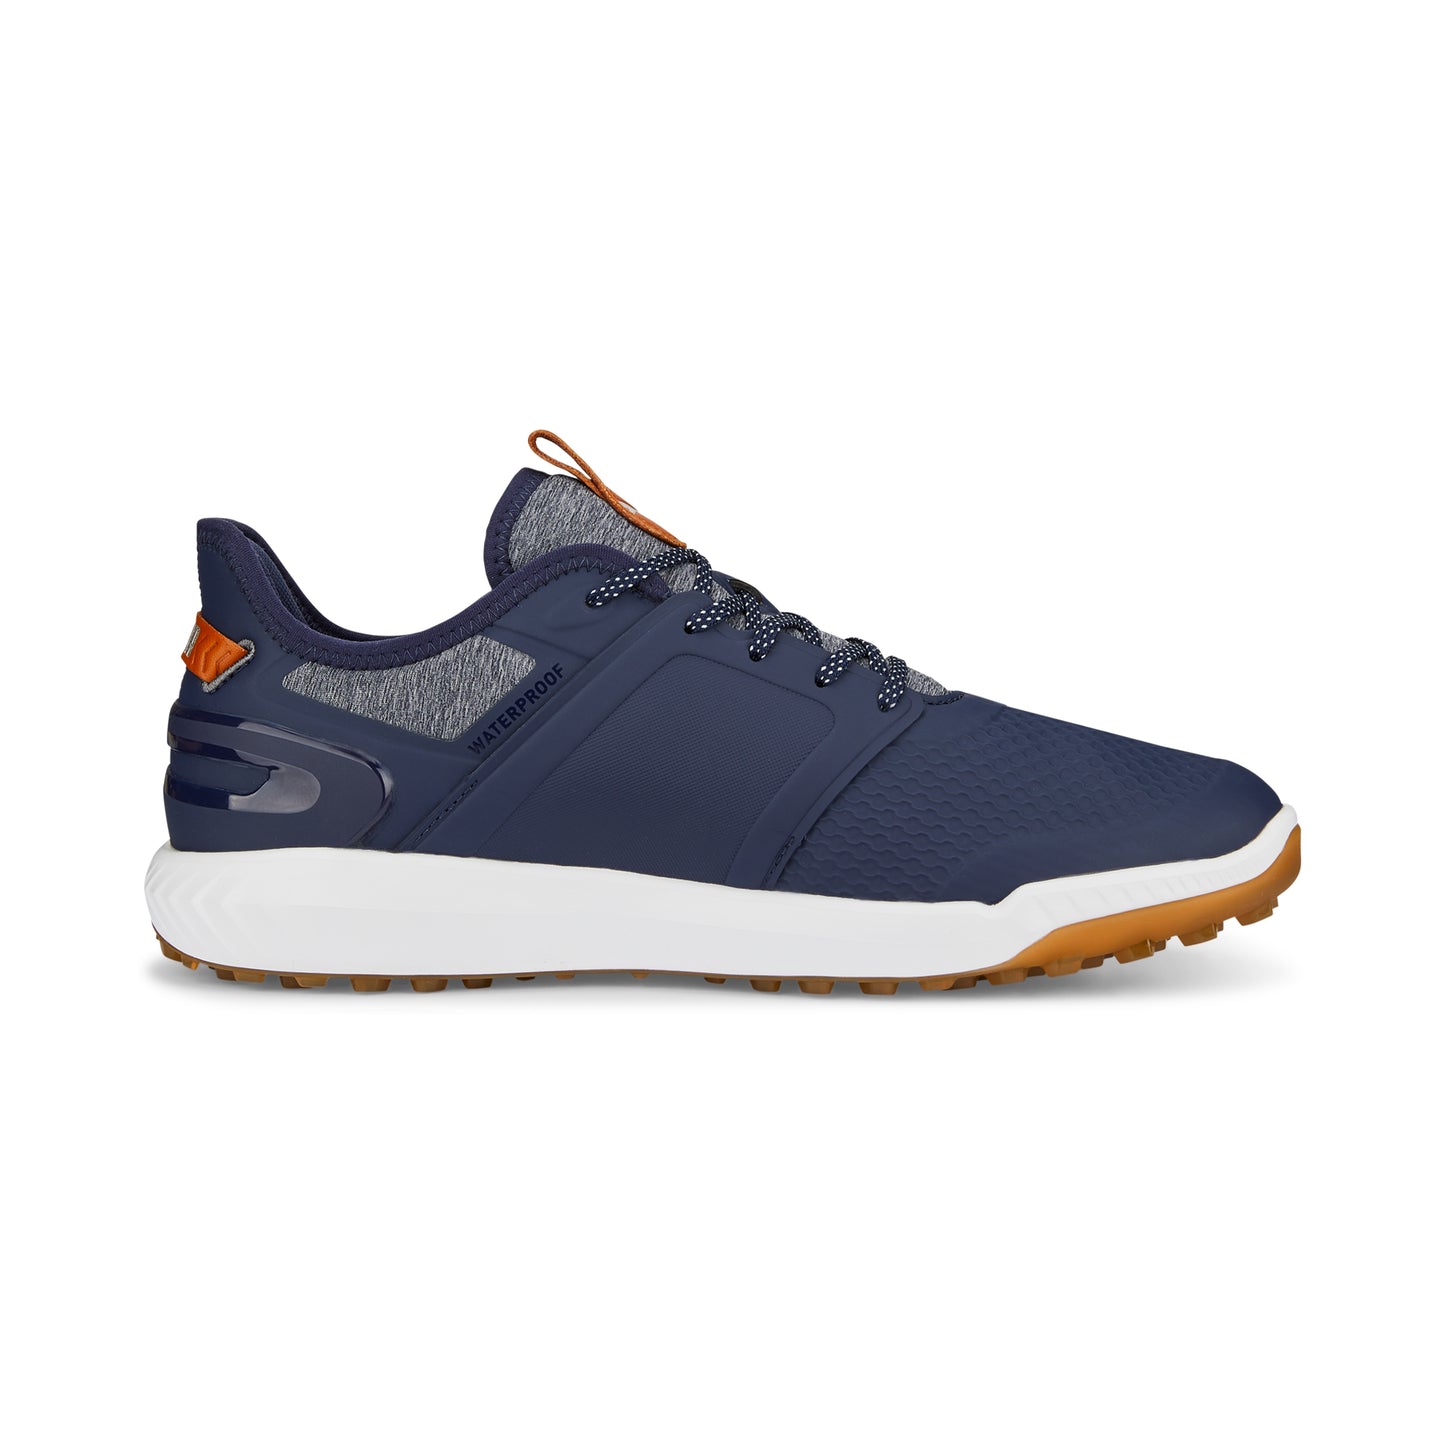 Puma Men's Ignite Elevate Spikeless Golf Shoes - Navy/Silver